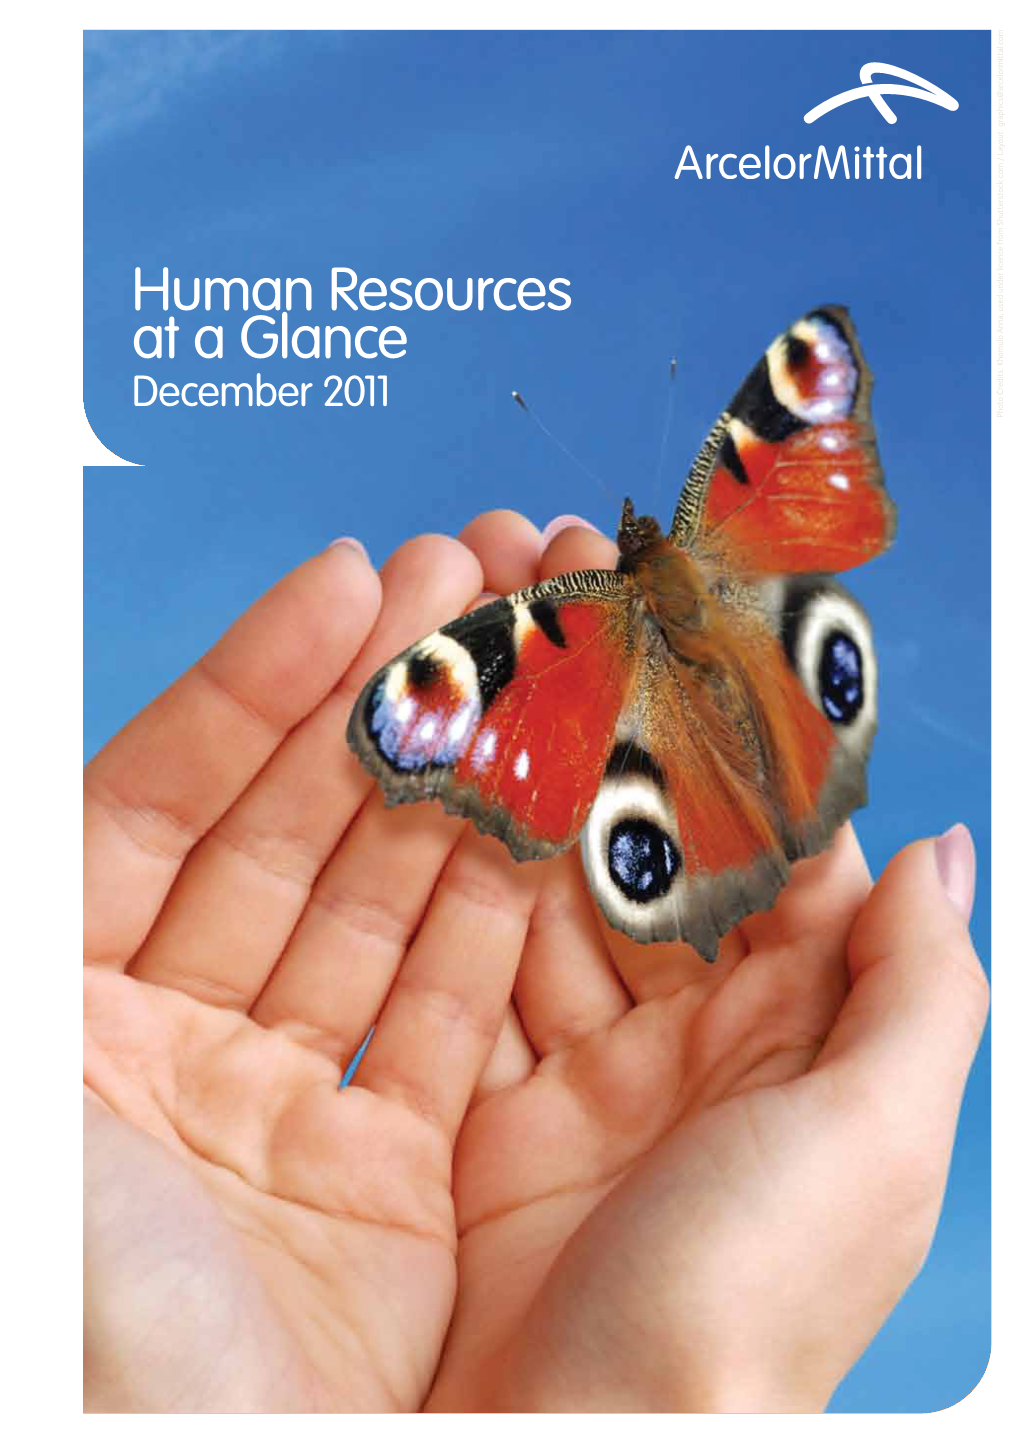 Human Resources at a Glance